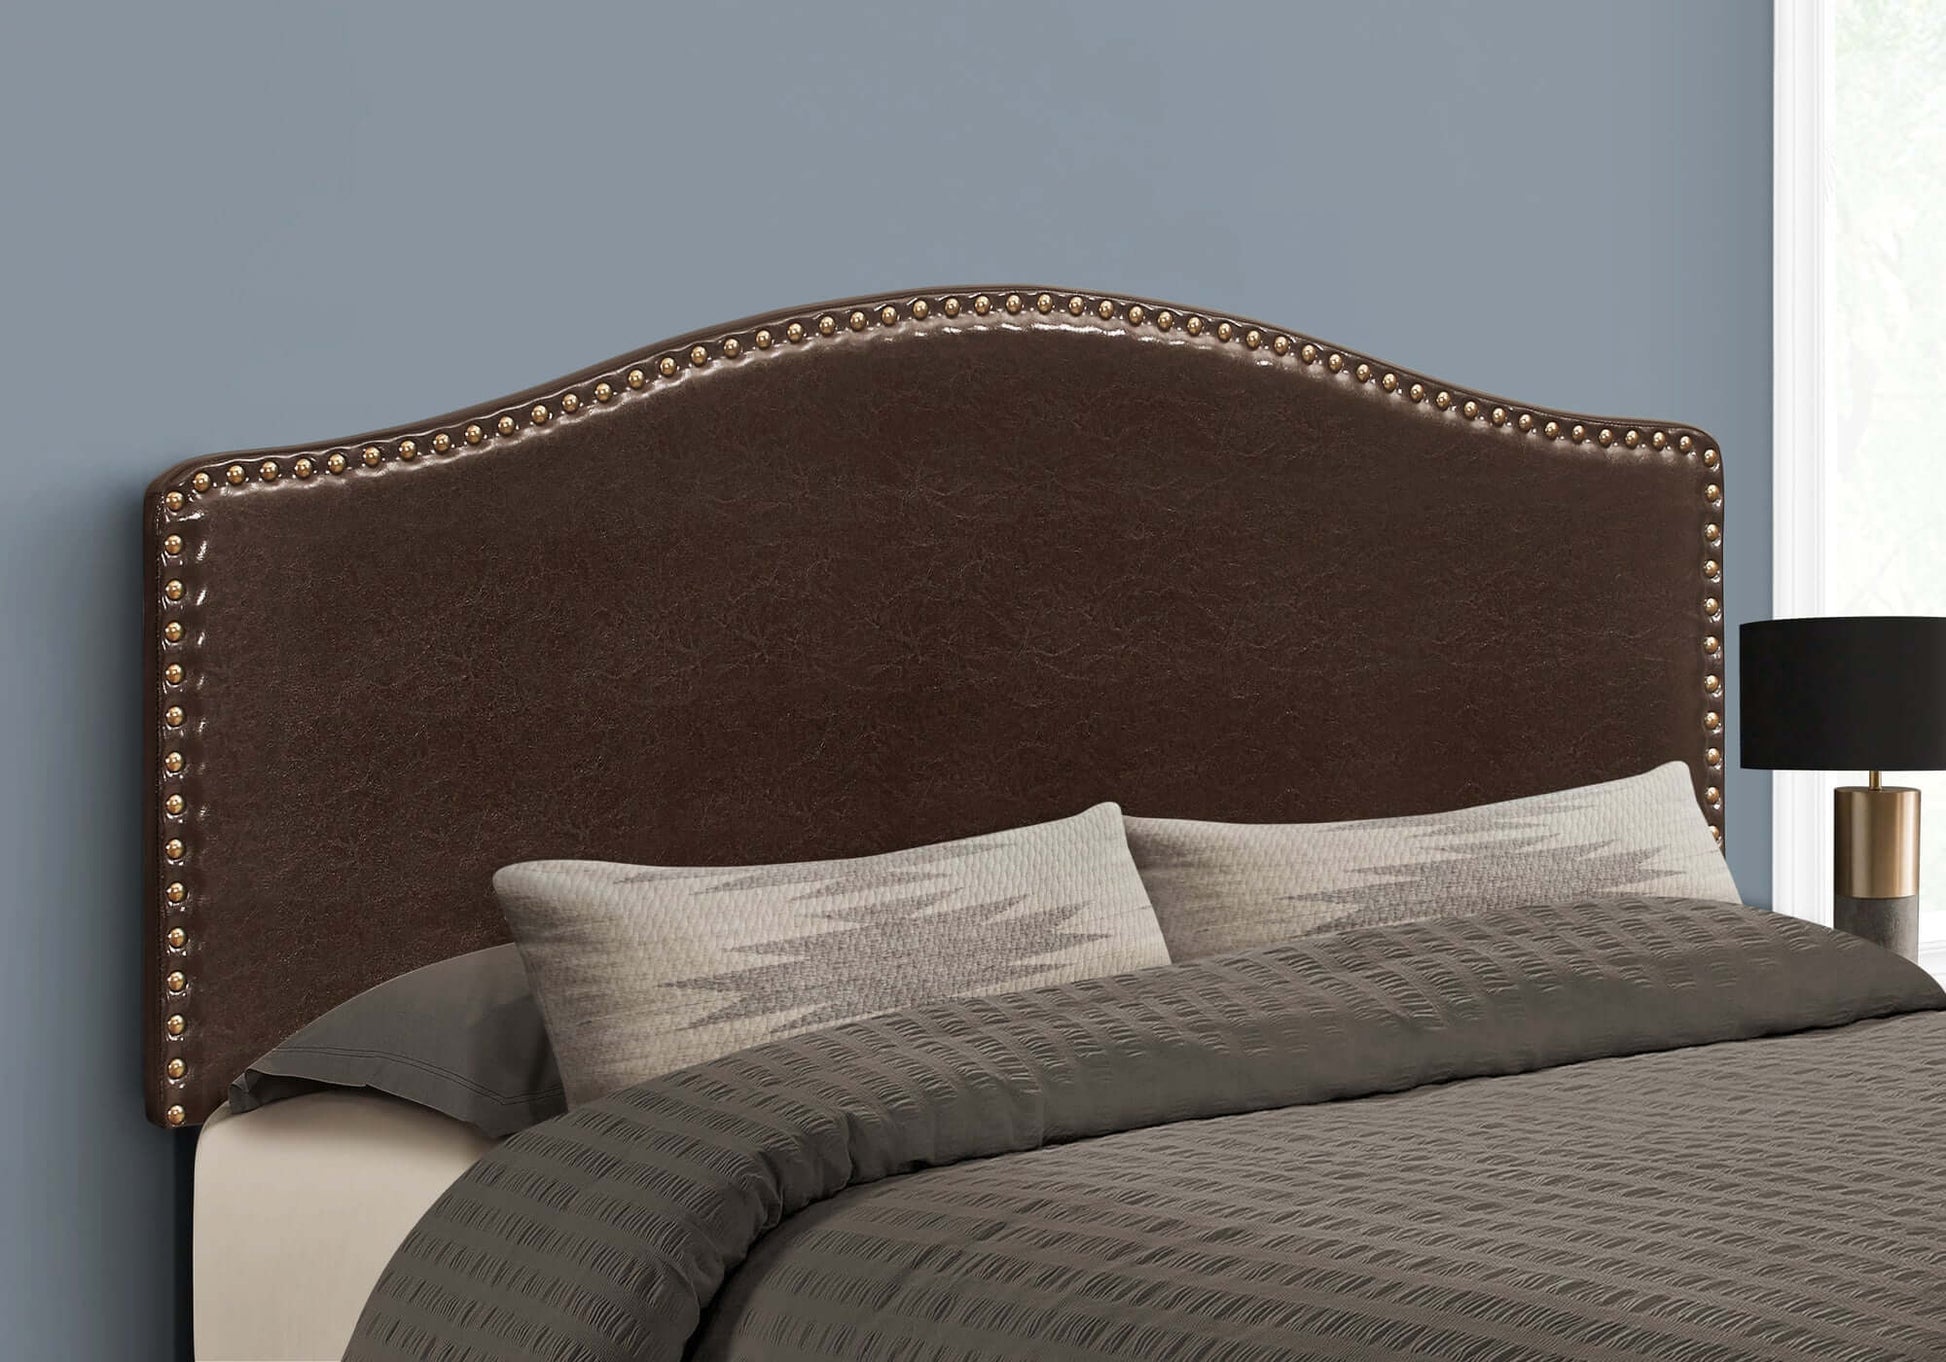 Monarch Specialties - Transitional Upholstered Arched Top Headboard in Brown Leather-Look Fabric - I 6010Q